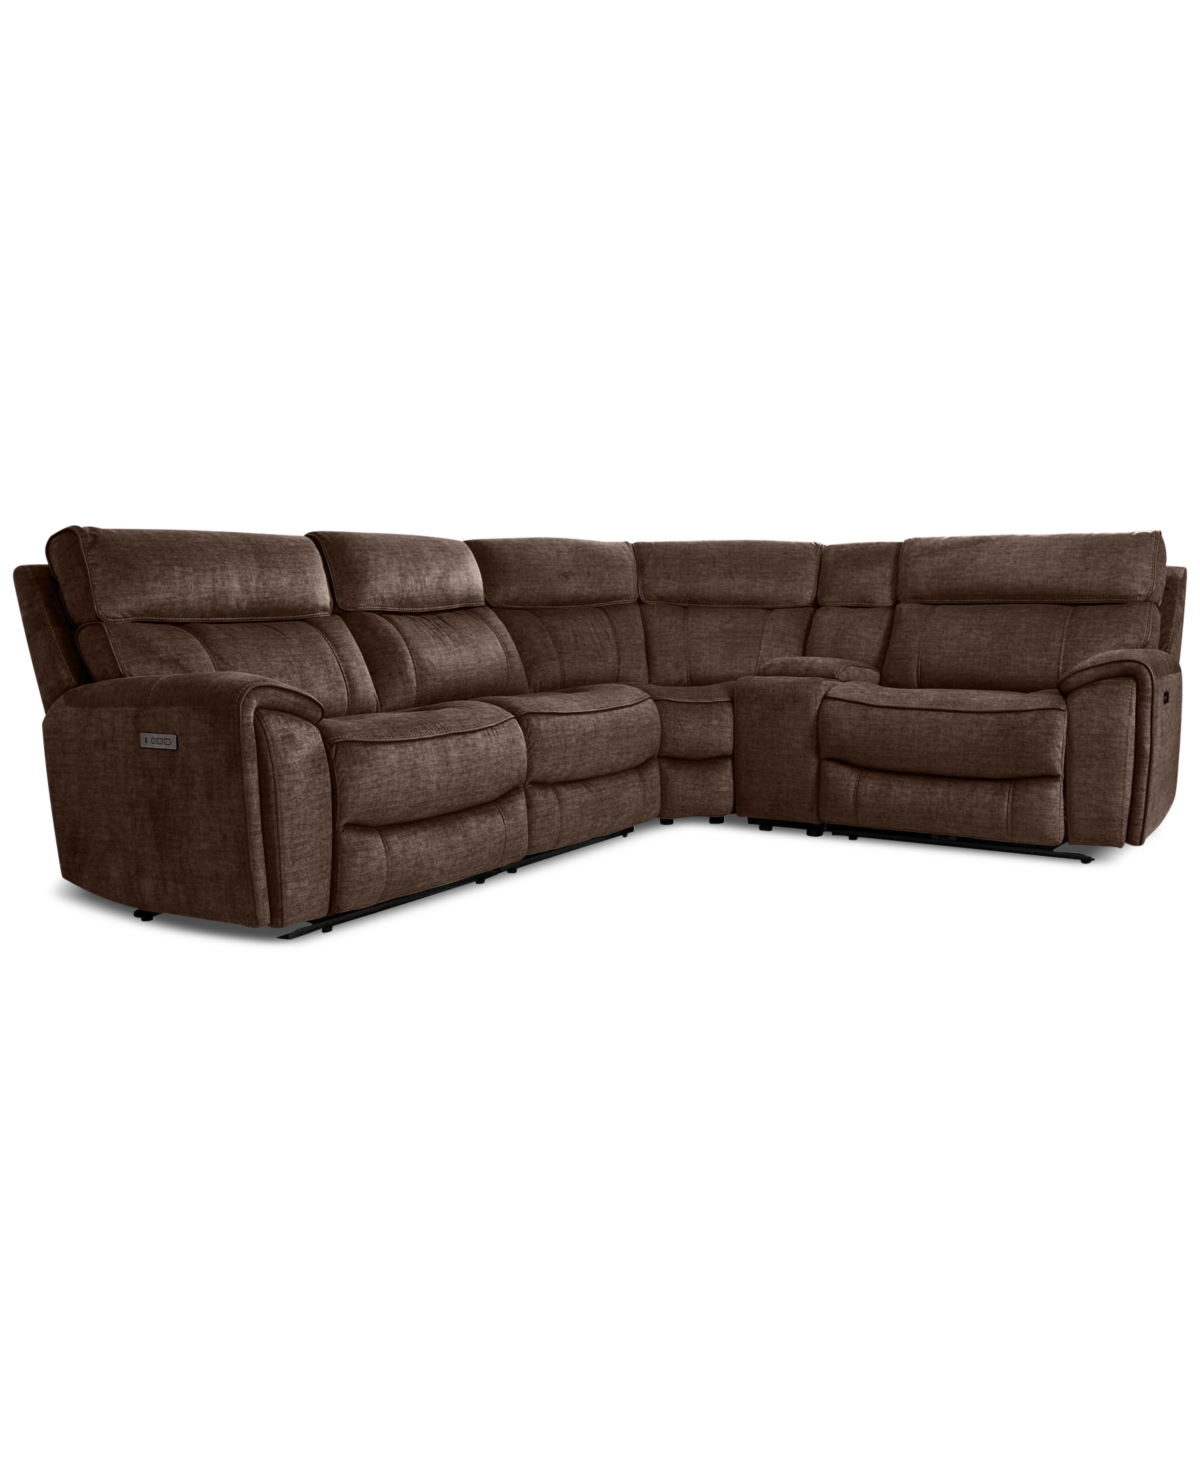 Furniture Hutchenson 5-pc. Fabric Sectional With 2 Power Recliners, Power Headrests And Console In Chocolate Brown